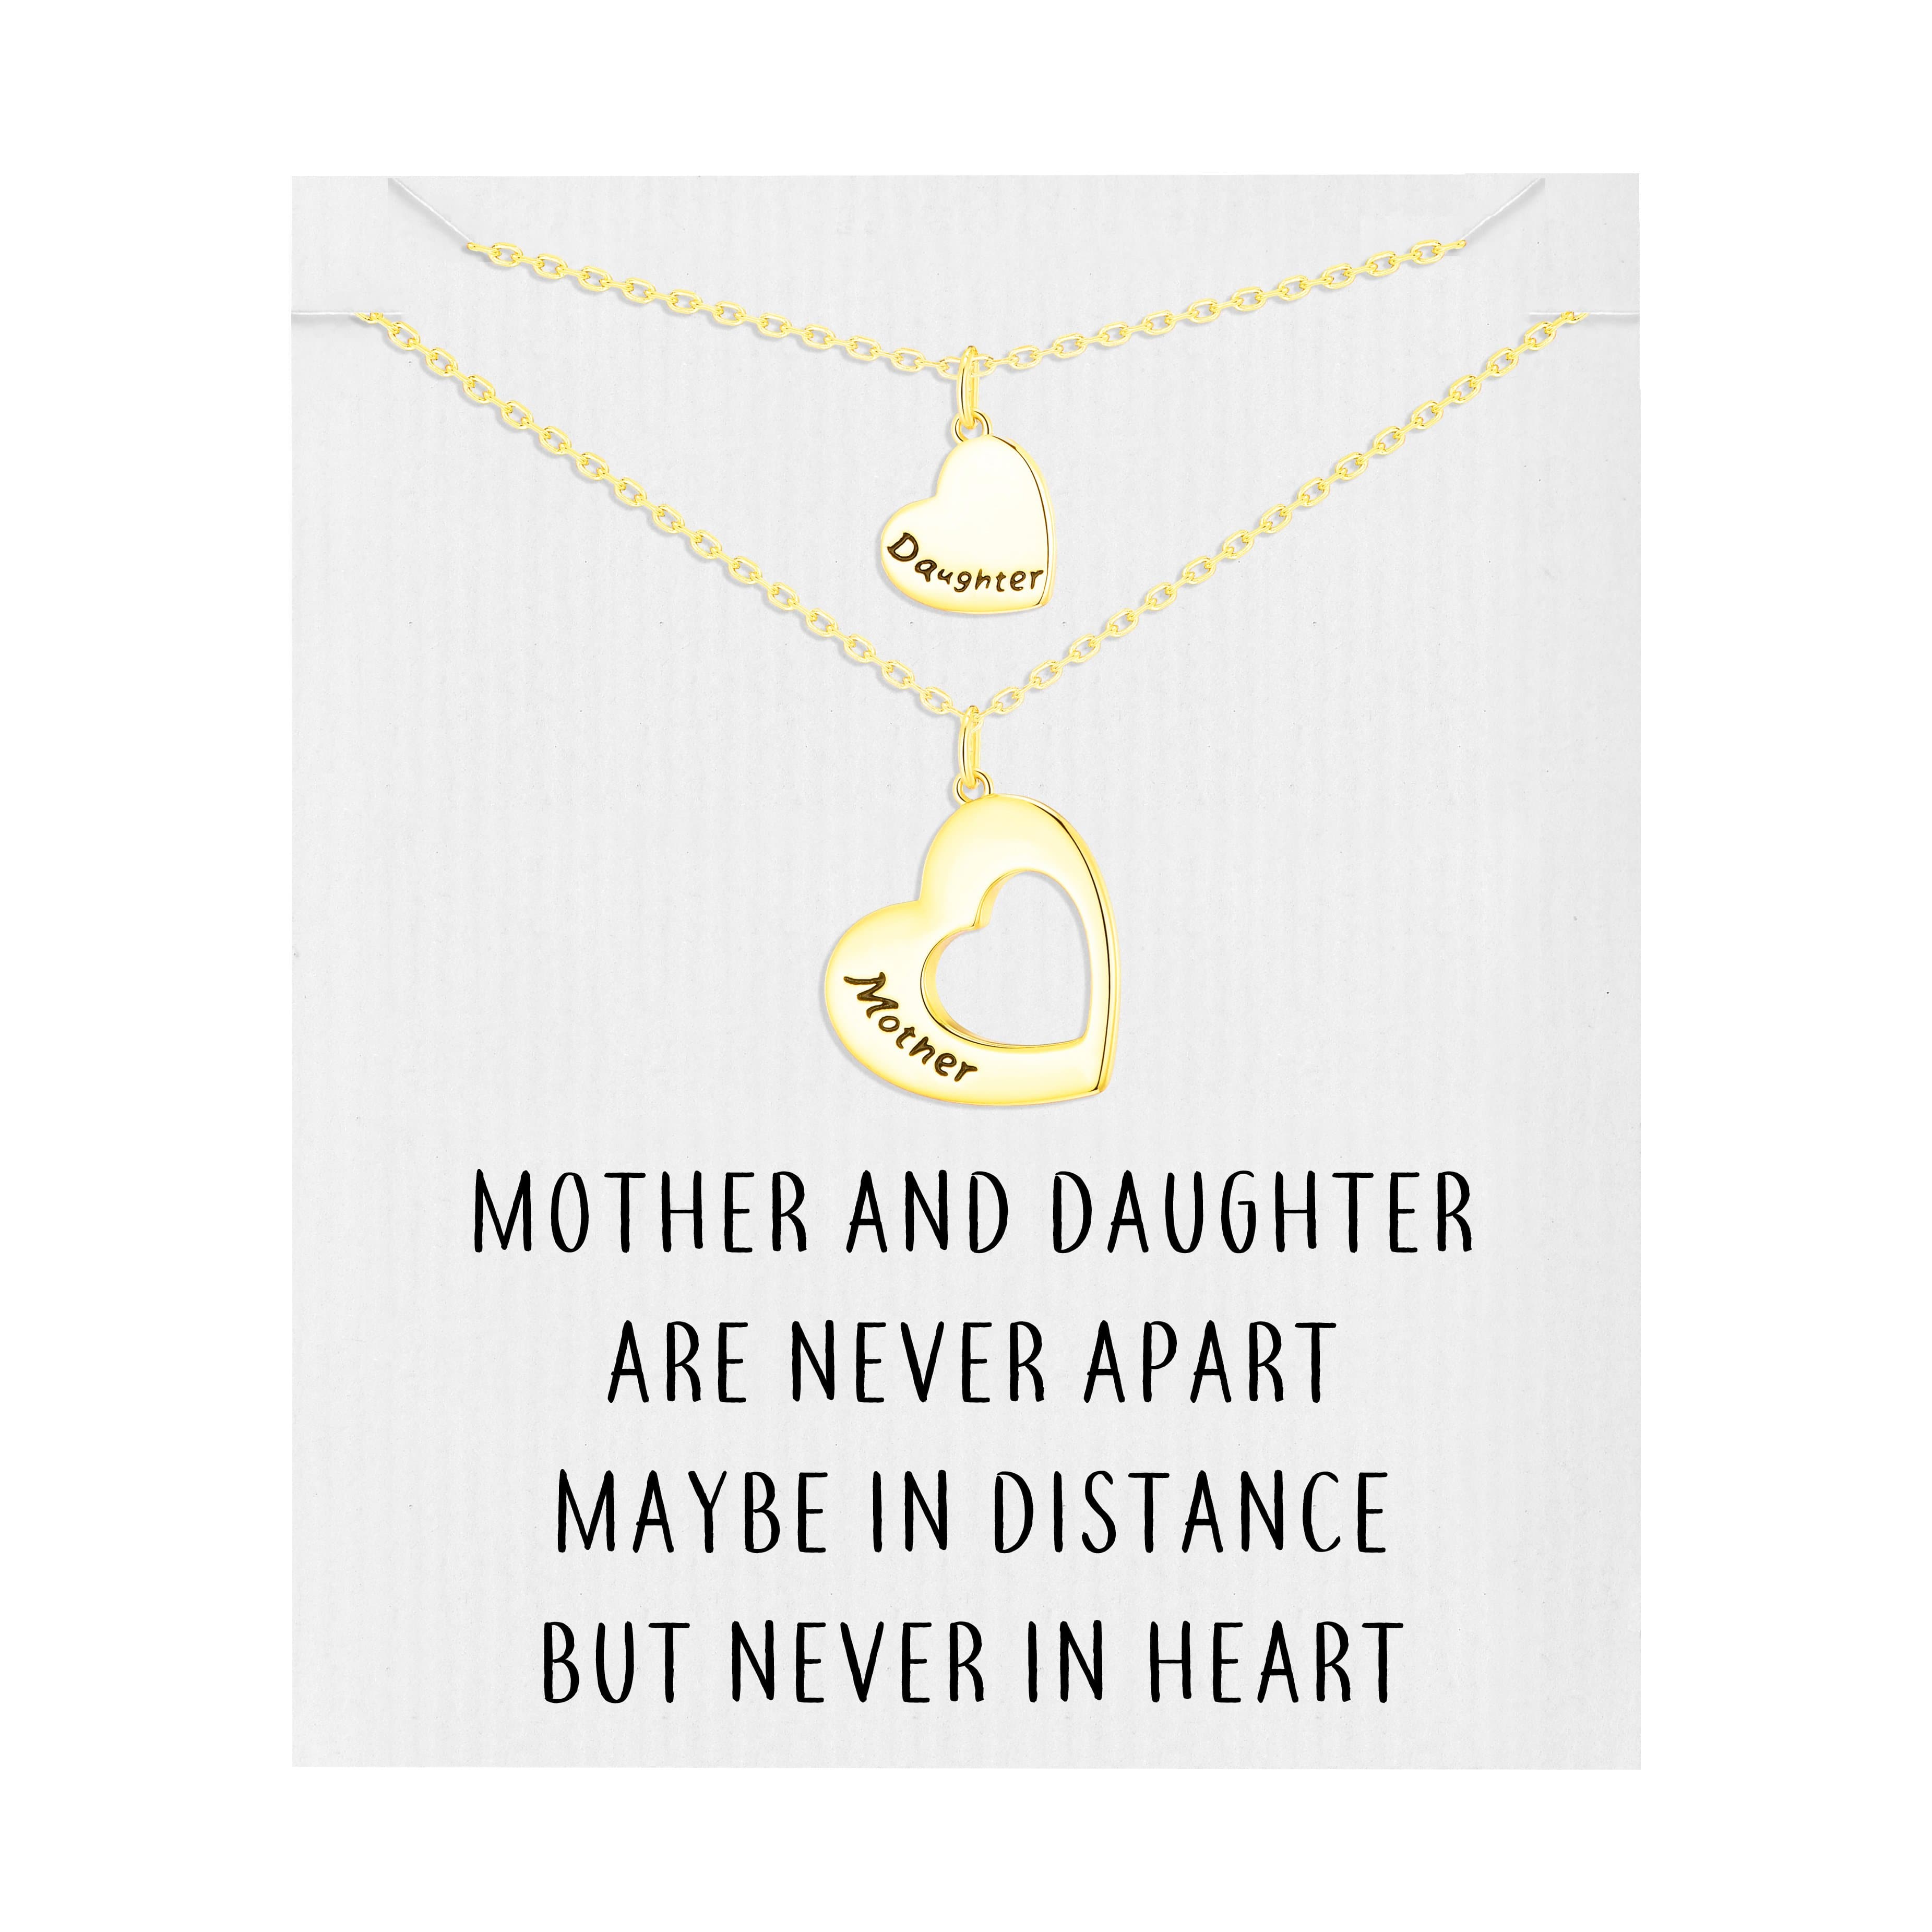 Gold Plated Mother and Daughter Necklace Set with Quote Card by Philip Jones Jewellery